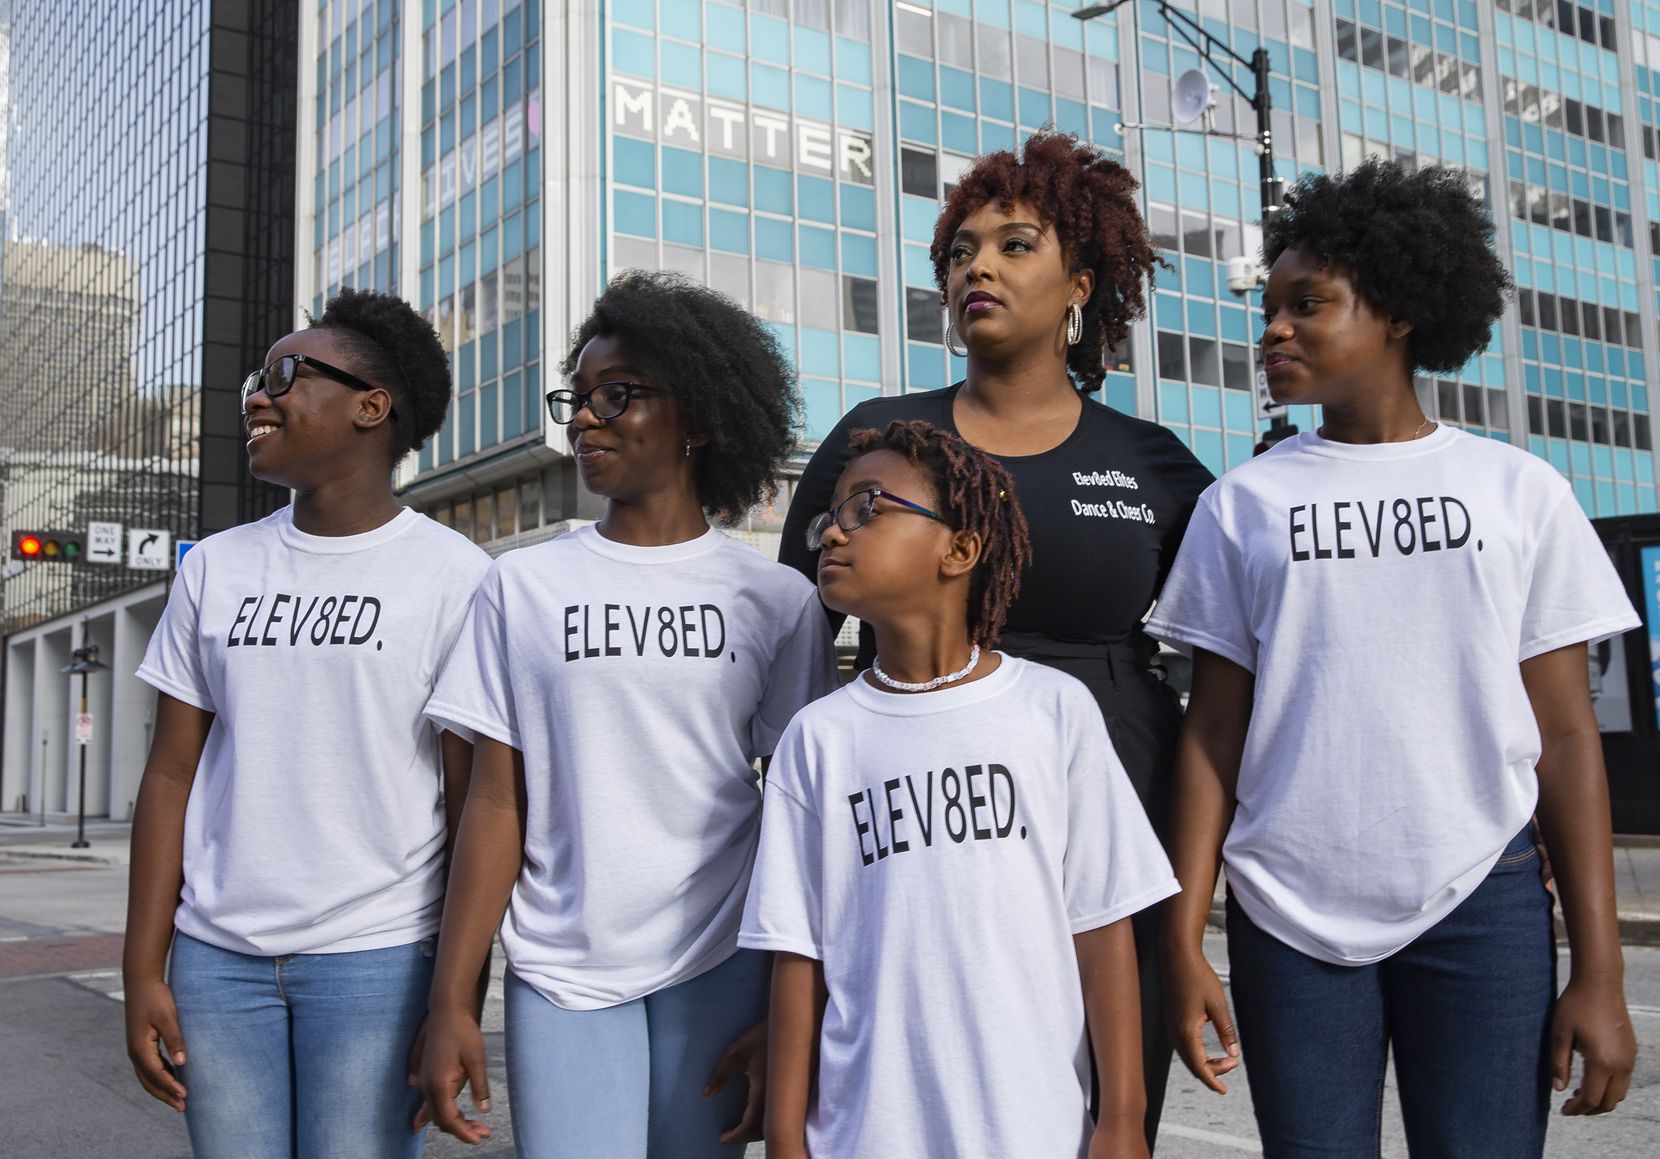 (From left) Members of Elev8ed Elites, Janyiah Cooks, 12, Zaria Fisher, 10, Arianna Roberts, 7, dance director Shantrail White and co-captain Sha'kyra Roberts, 13, pose for a photo on June 27, 2020 in Dallas. Elev8ed Elites is an all girls dance team that shot a video downtown in response to police brutality shortly after George Floyd died. (Juan Figueroa/ The Dallas Morning News)